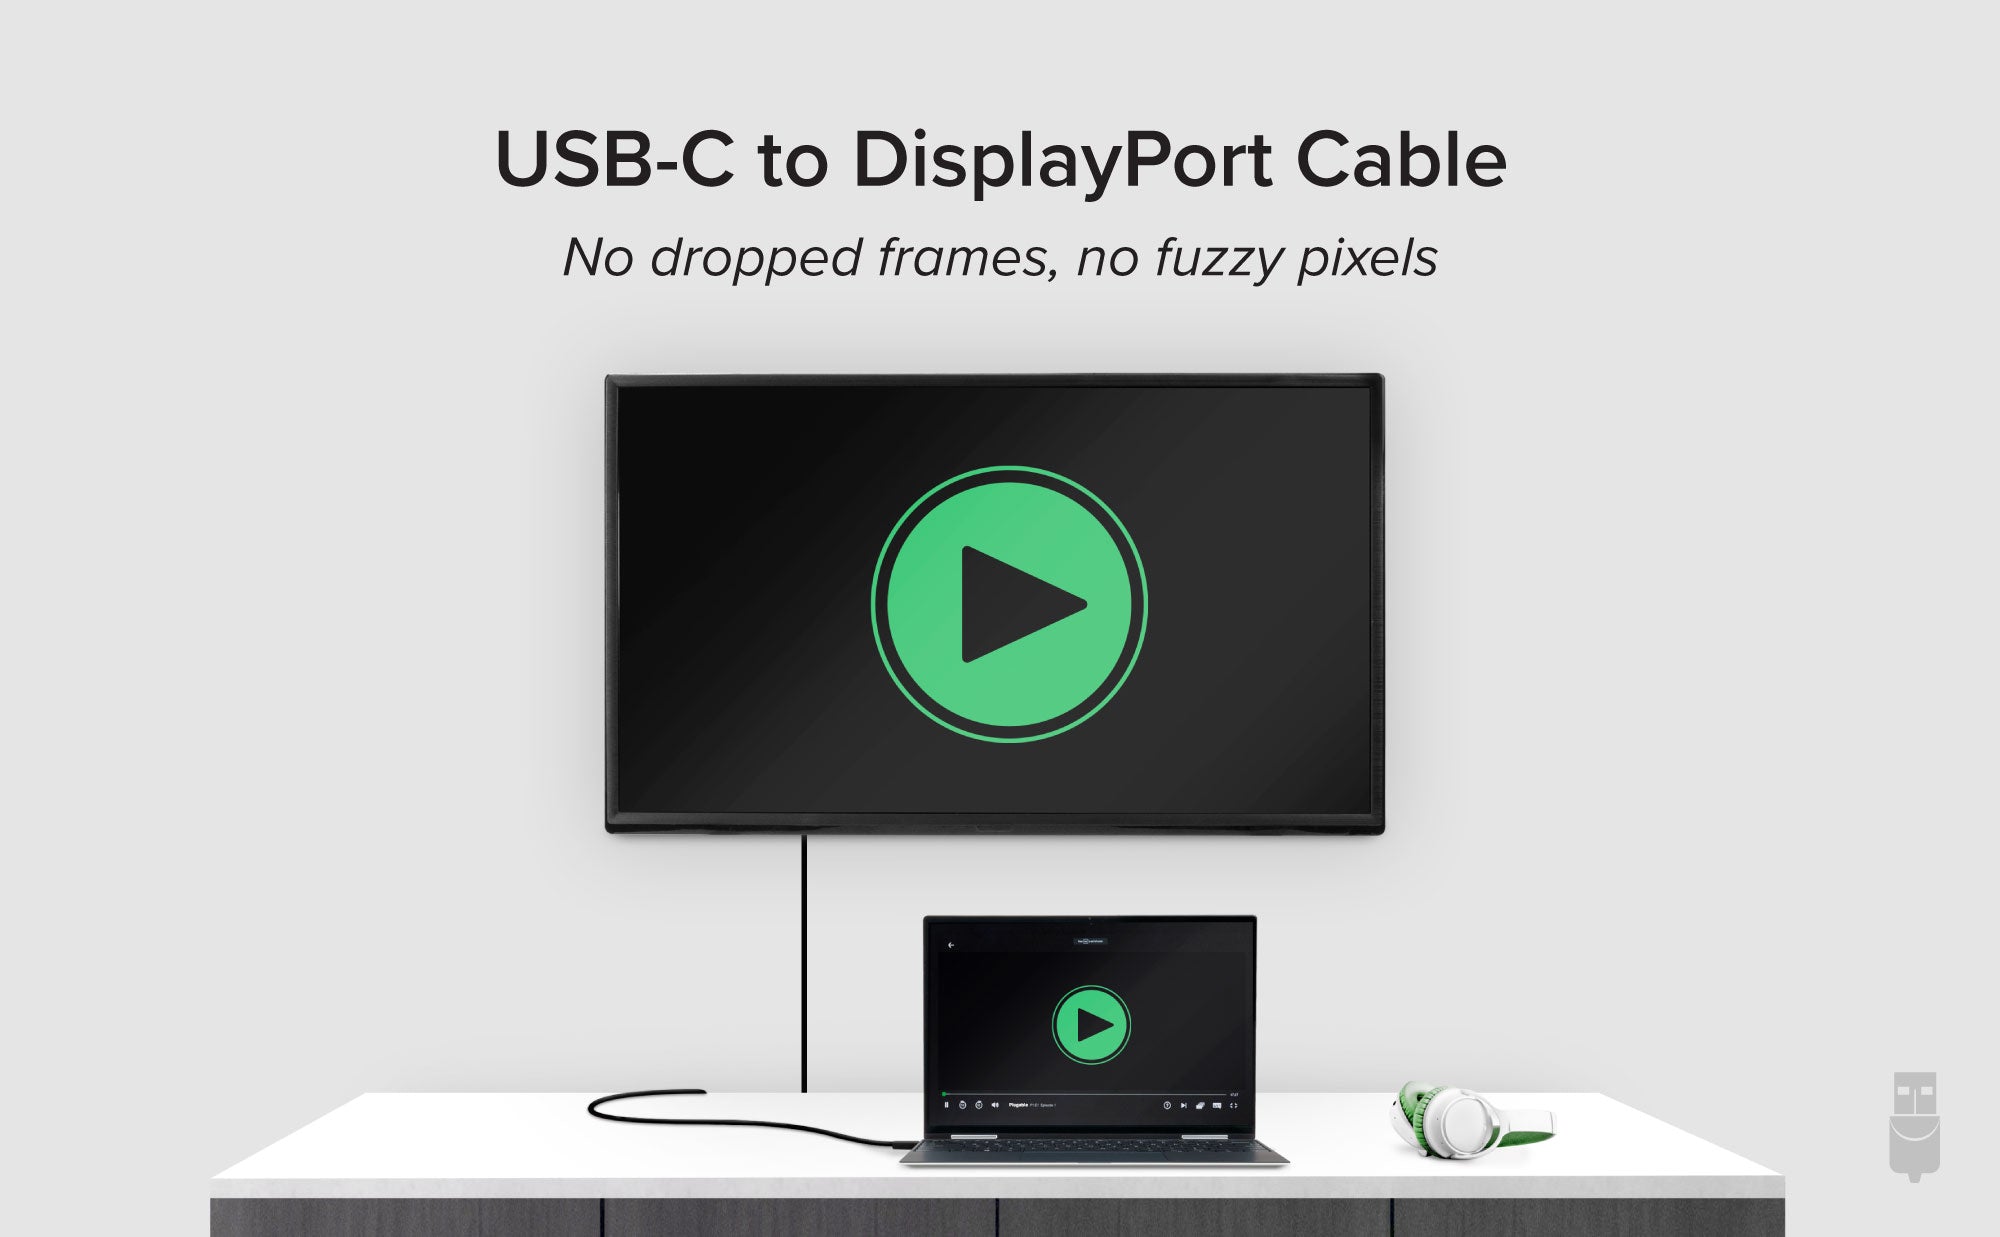 Image showing the USB-C to DisplayPort cable in use. "No dropped frames, no fuzzy pixels."